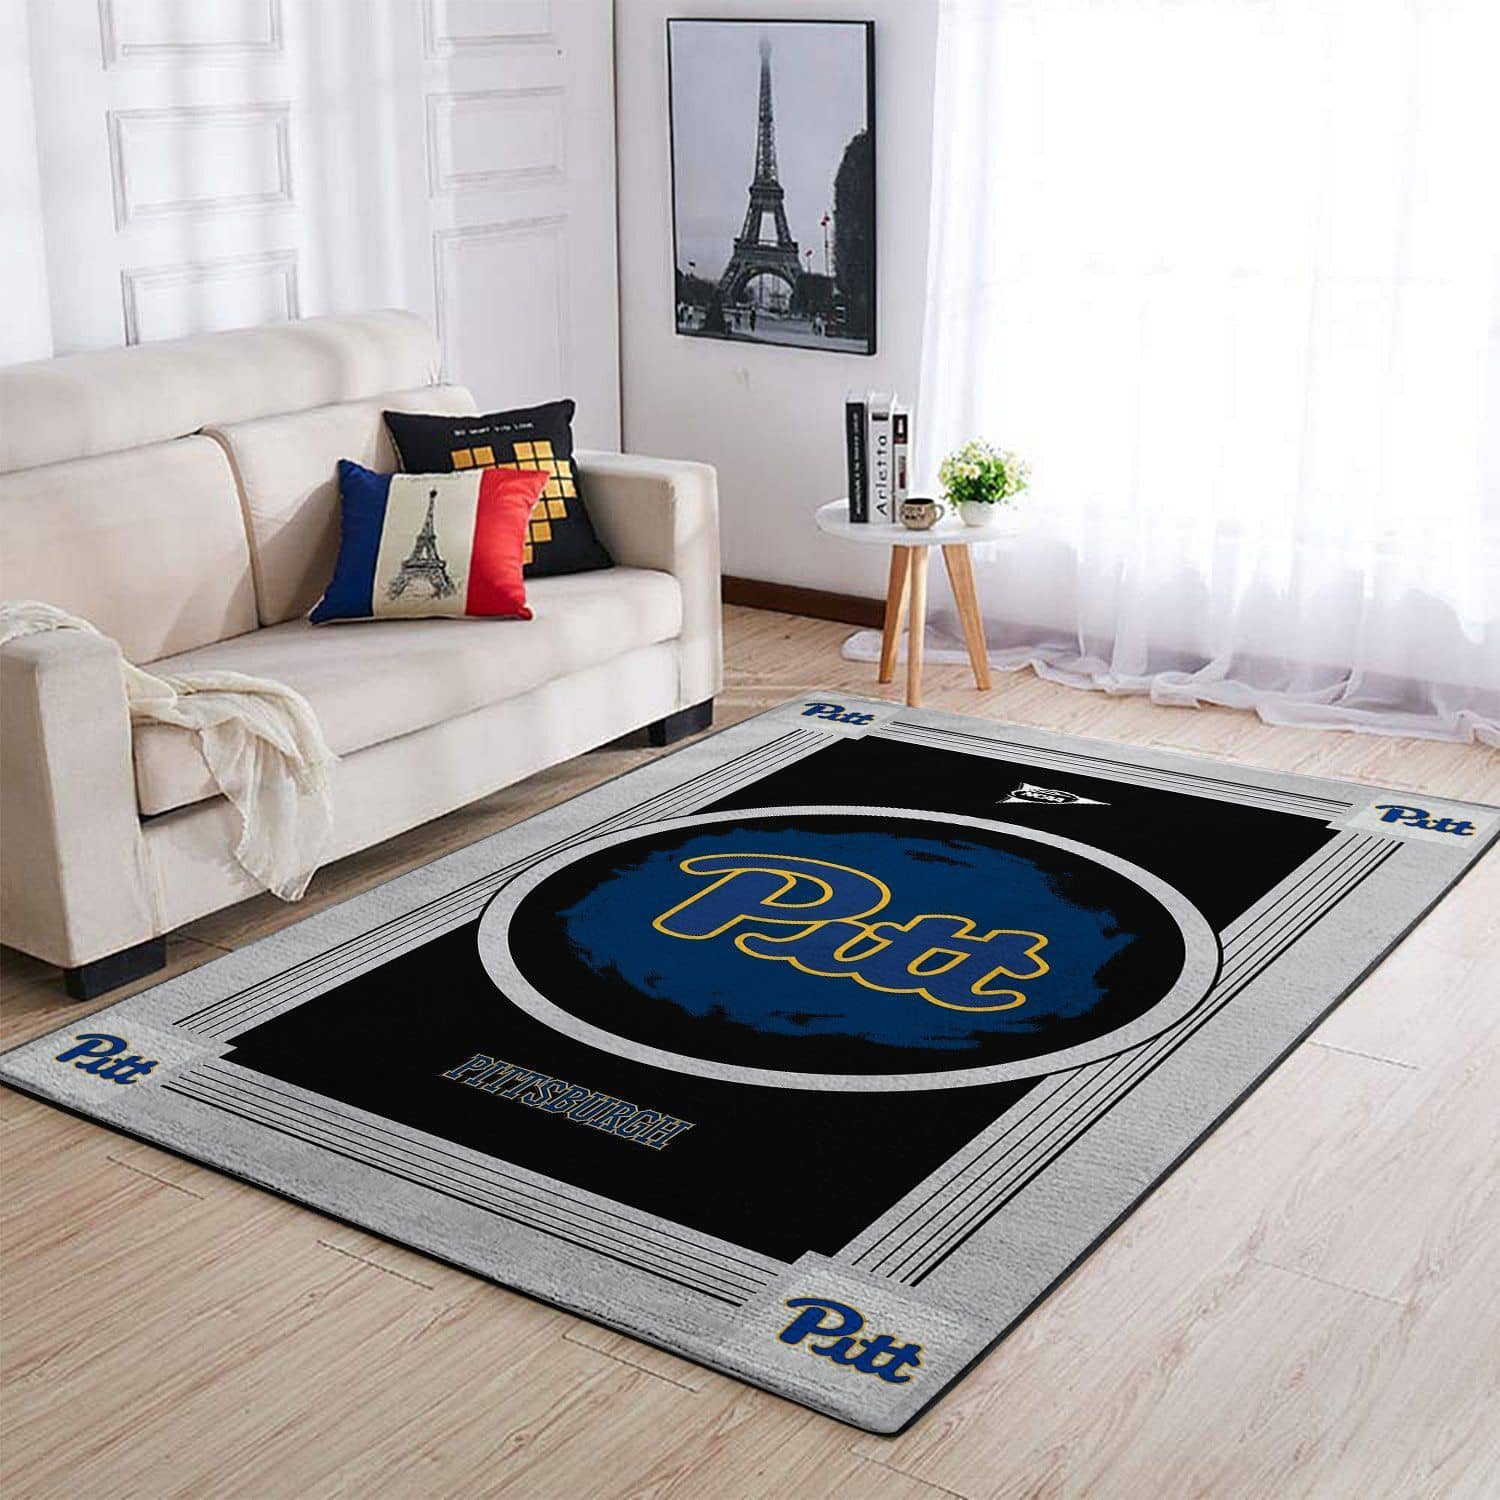 Amazon Pitt Panthers Living Room Area No4624 Rug